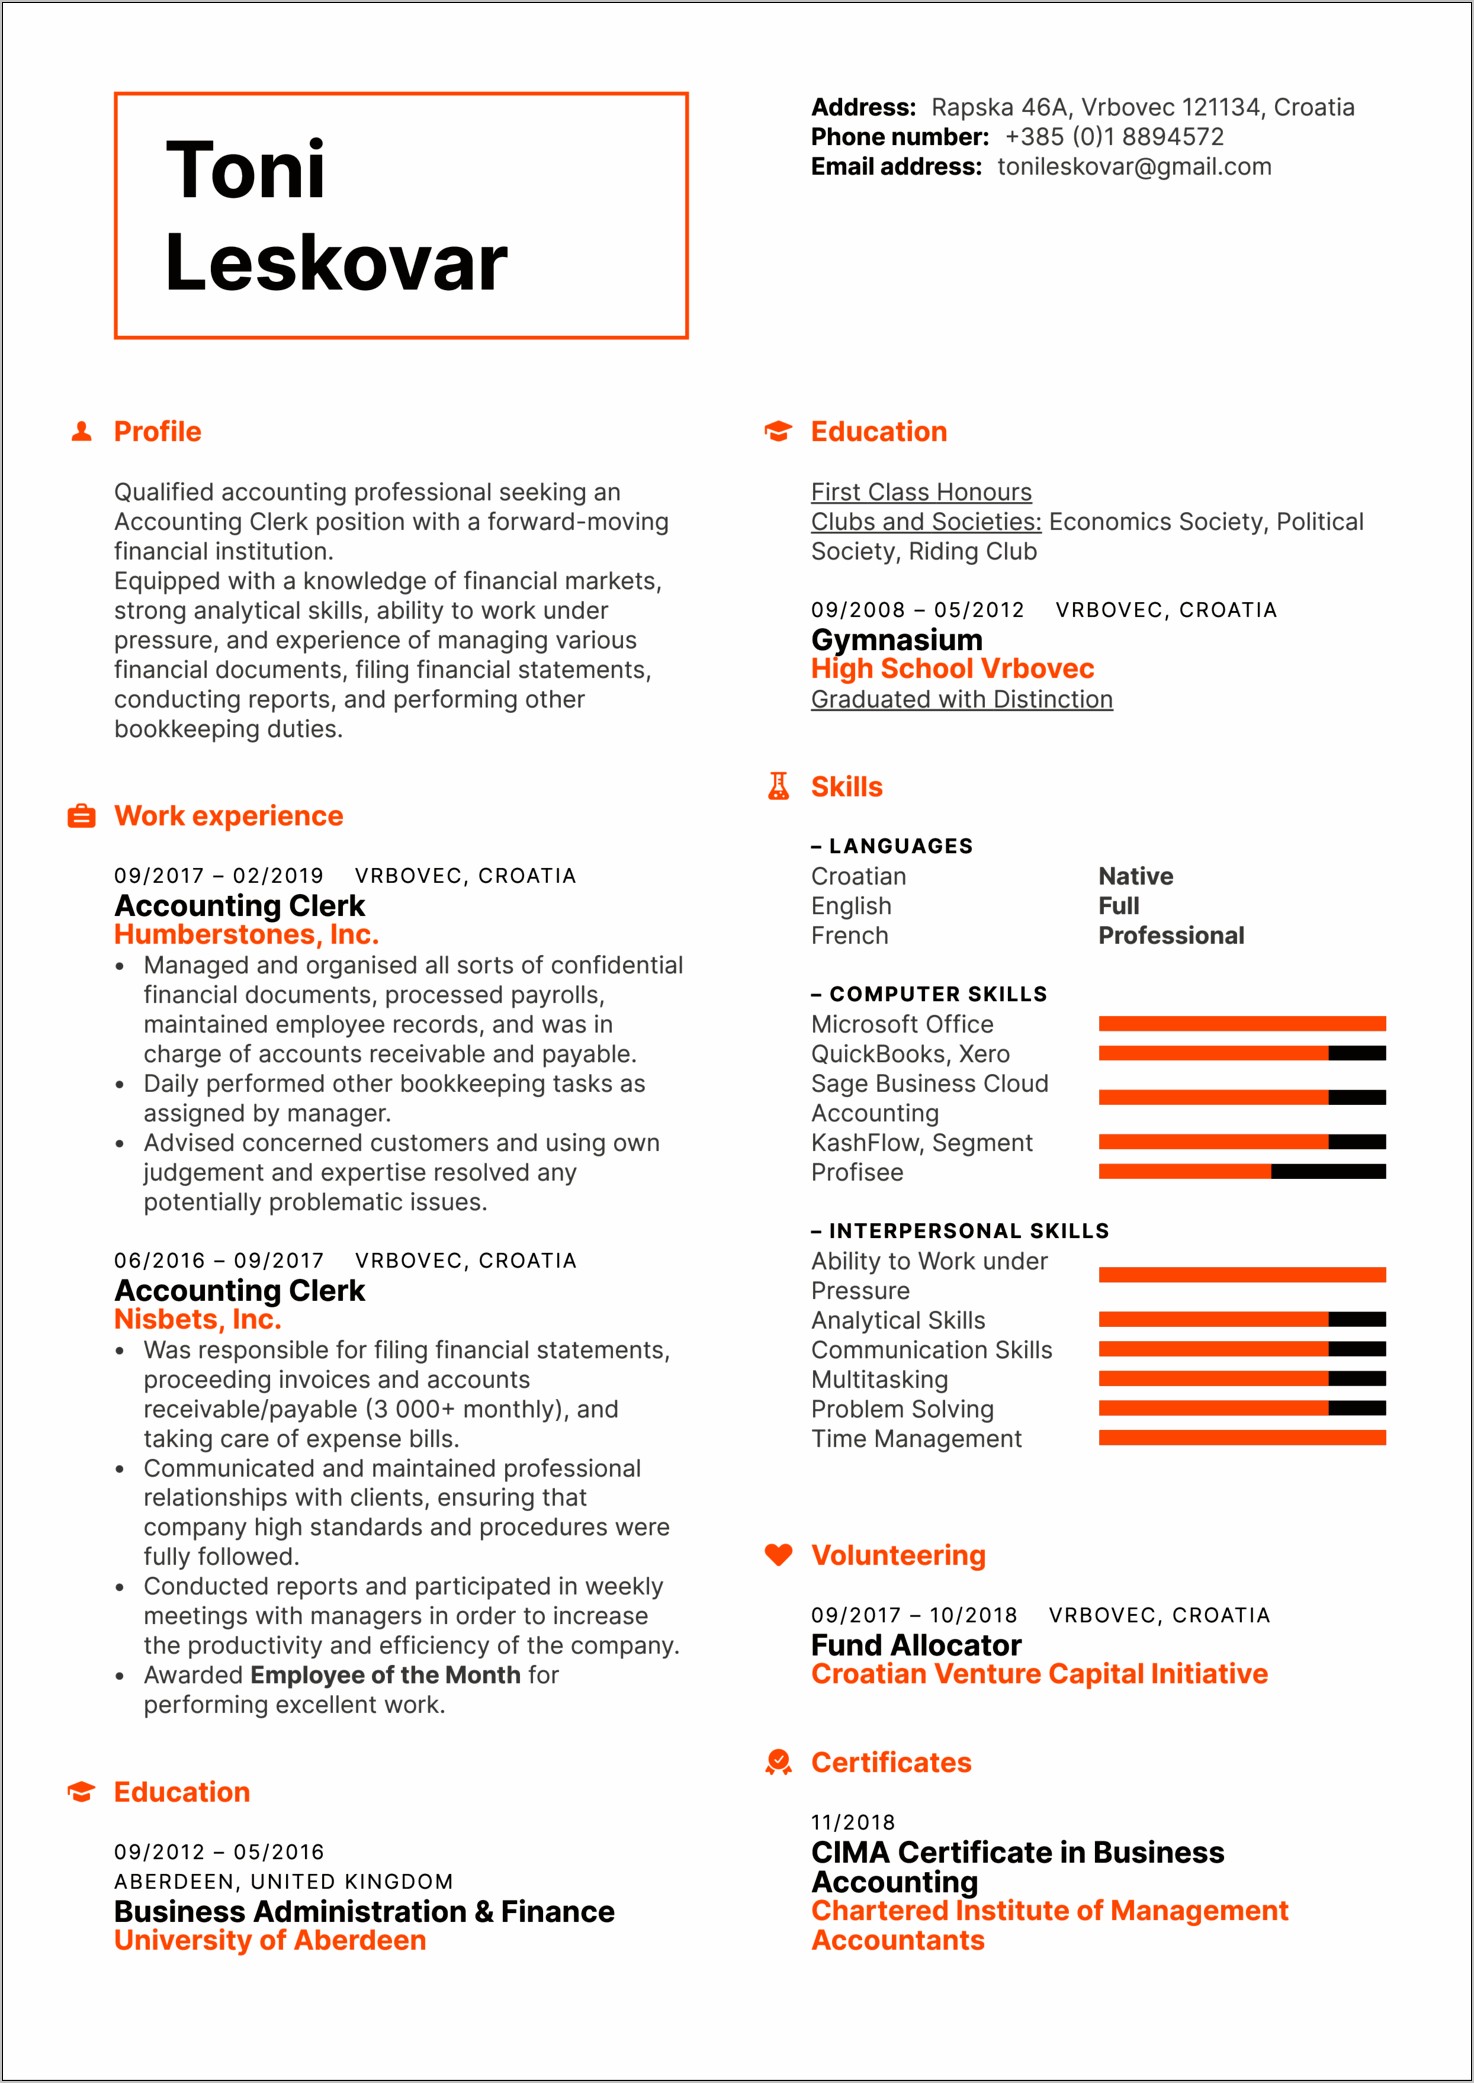 Sample Resume For Accounting Assistant Position